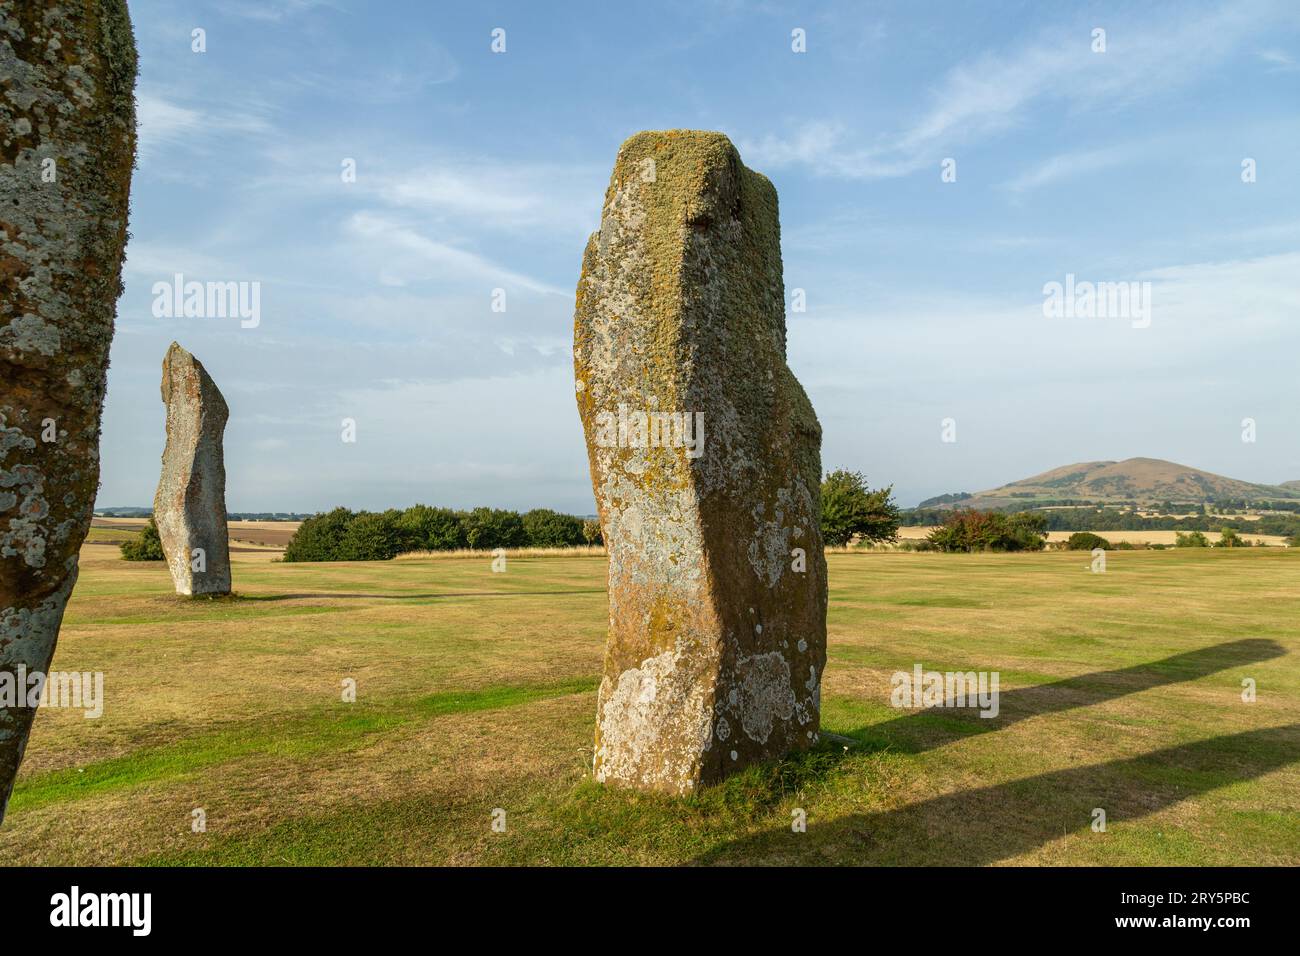 The impressive standing stones of Lundin Links which stand in the middle of a golf course, Fife Scotland. Stock Photo